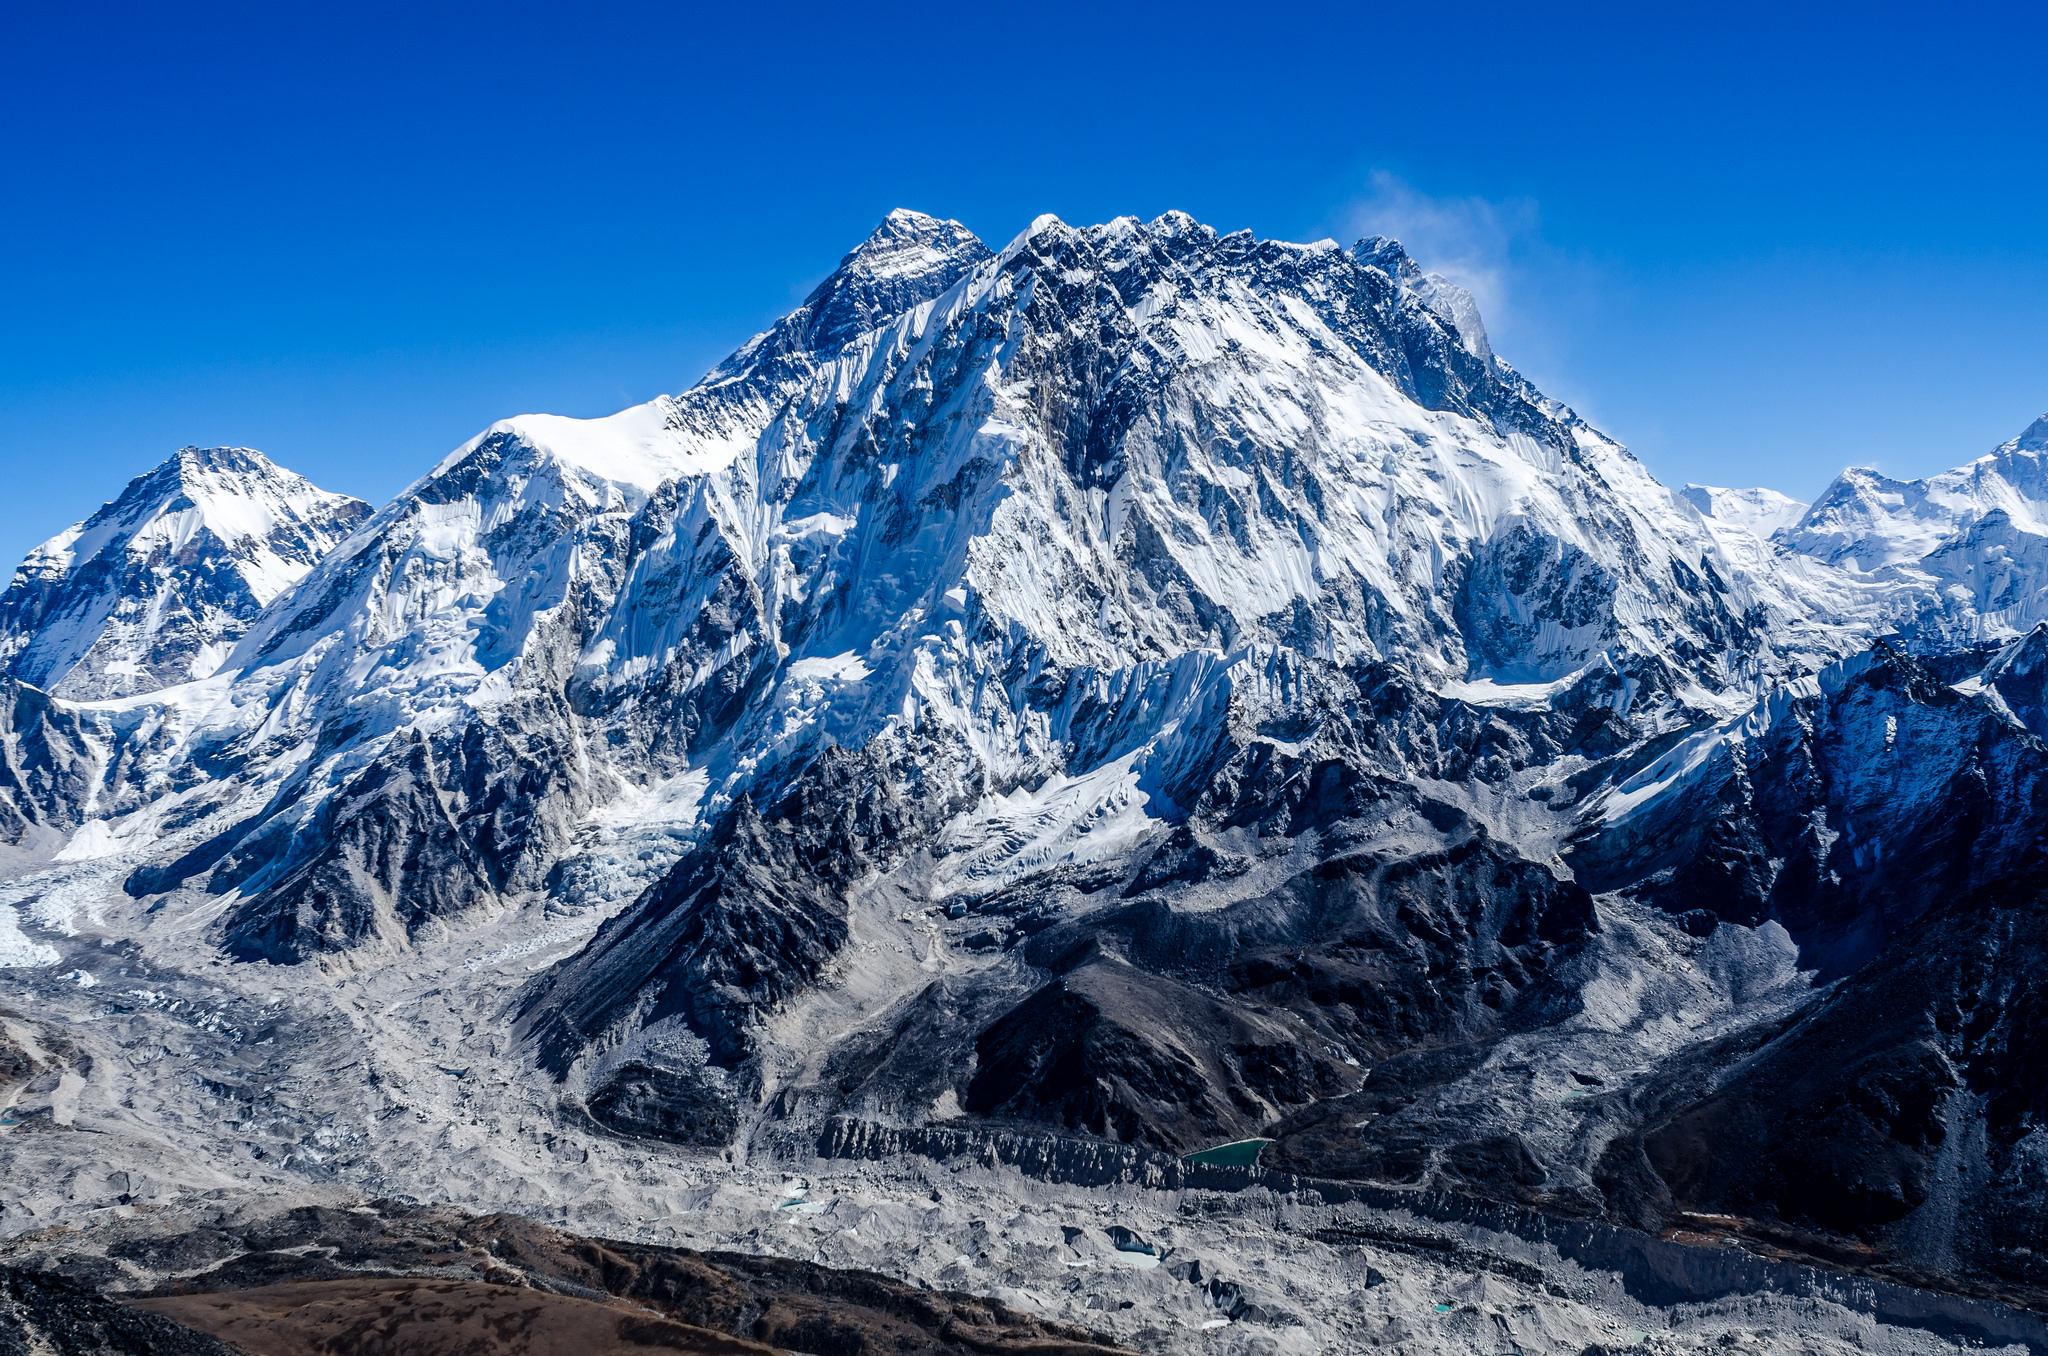 Seattleites conquer Mount Everest. Well, at least its poop problem ...